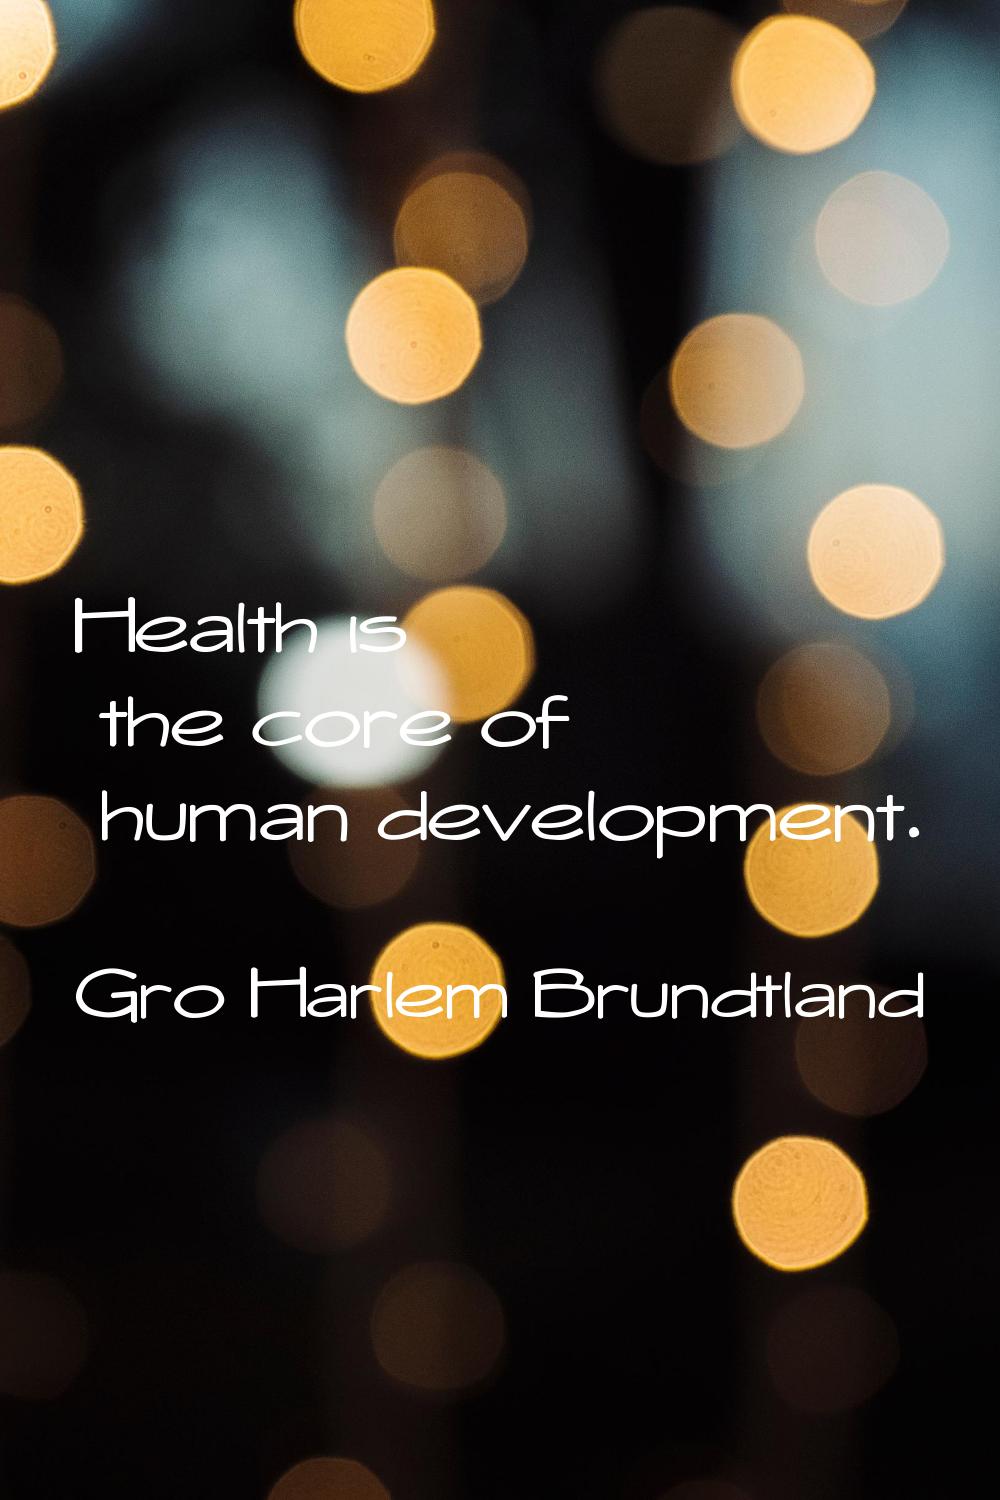 Health is the core of human development.